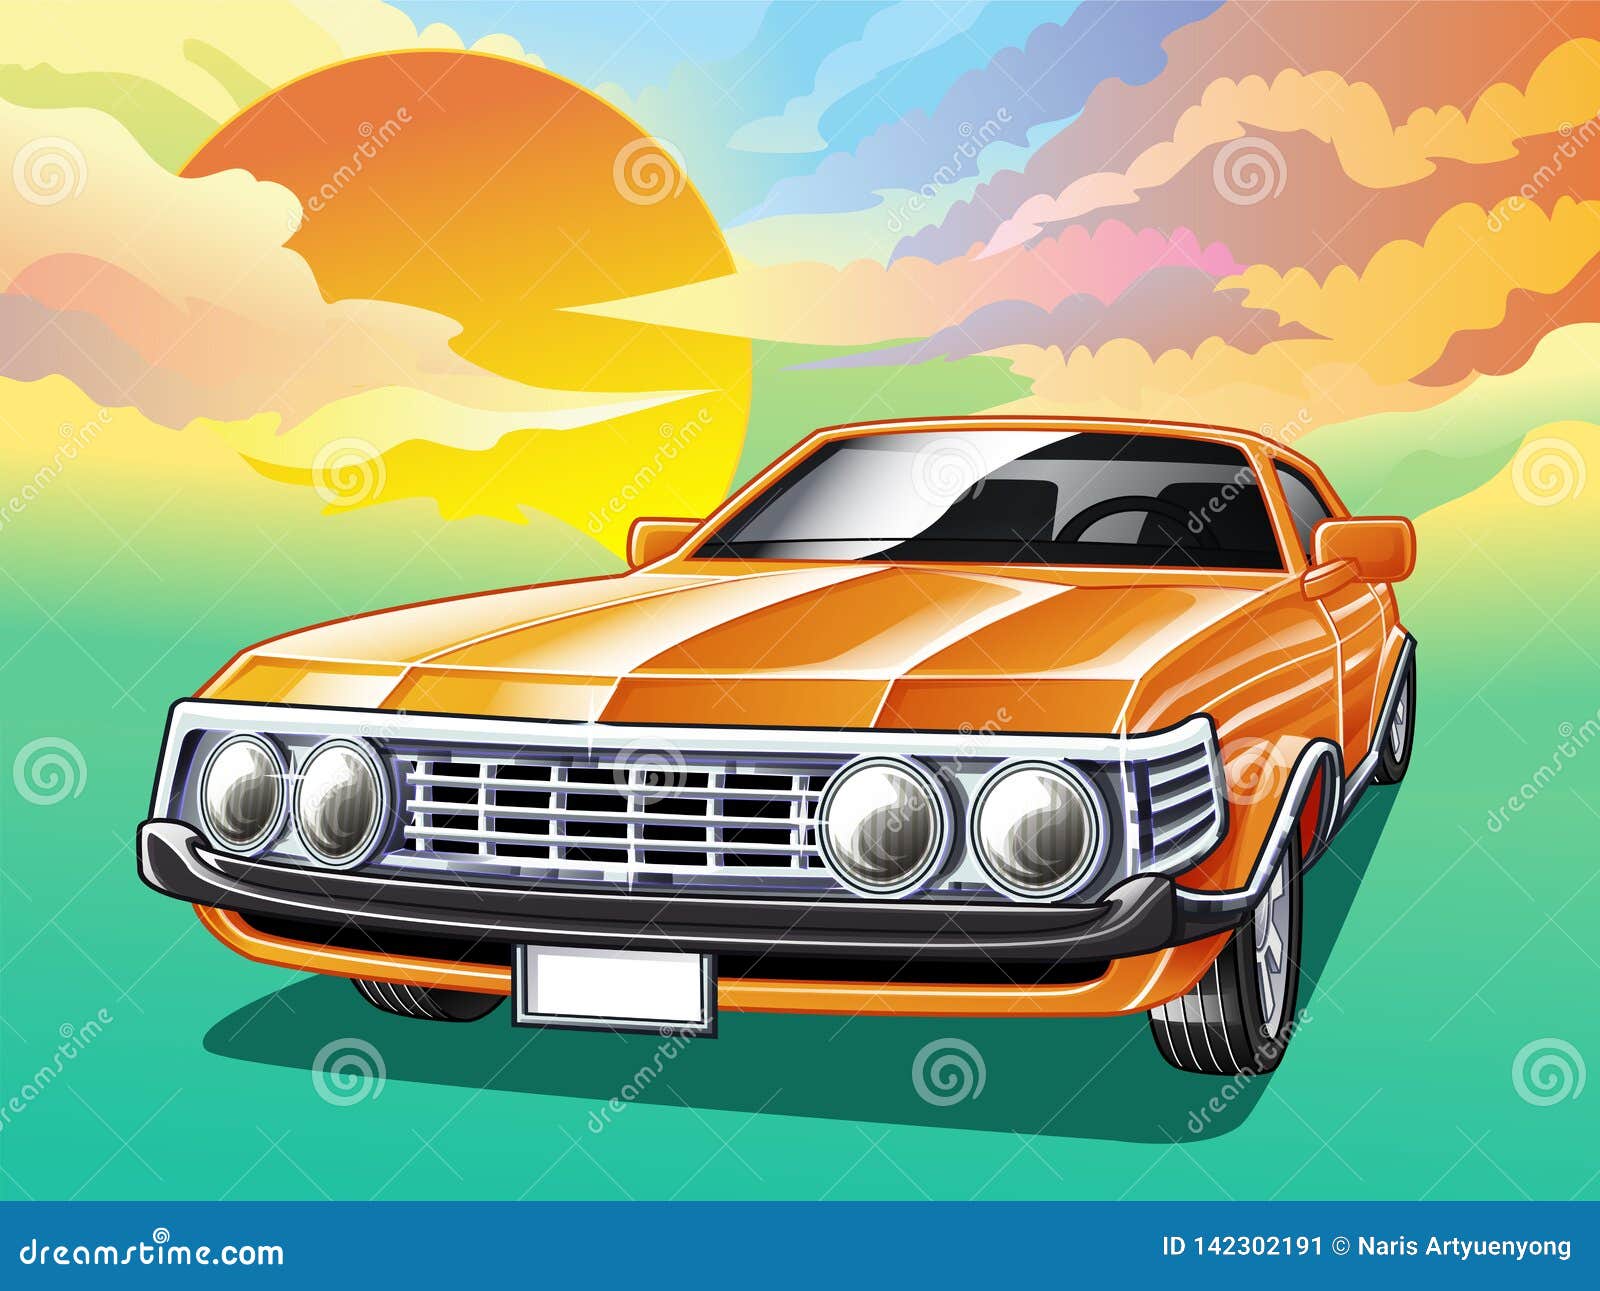 Vintage Car on Sky Background in Cartoon Style. Stock Vector